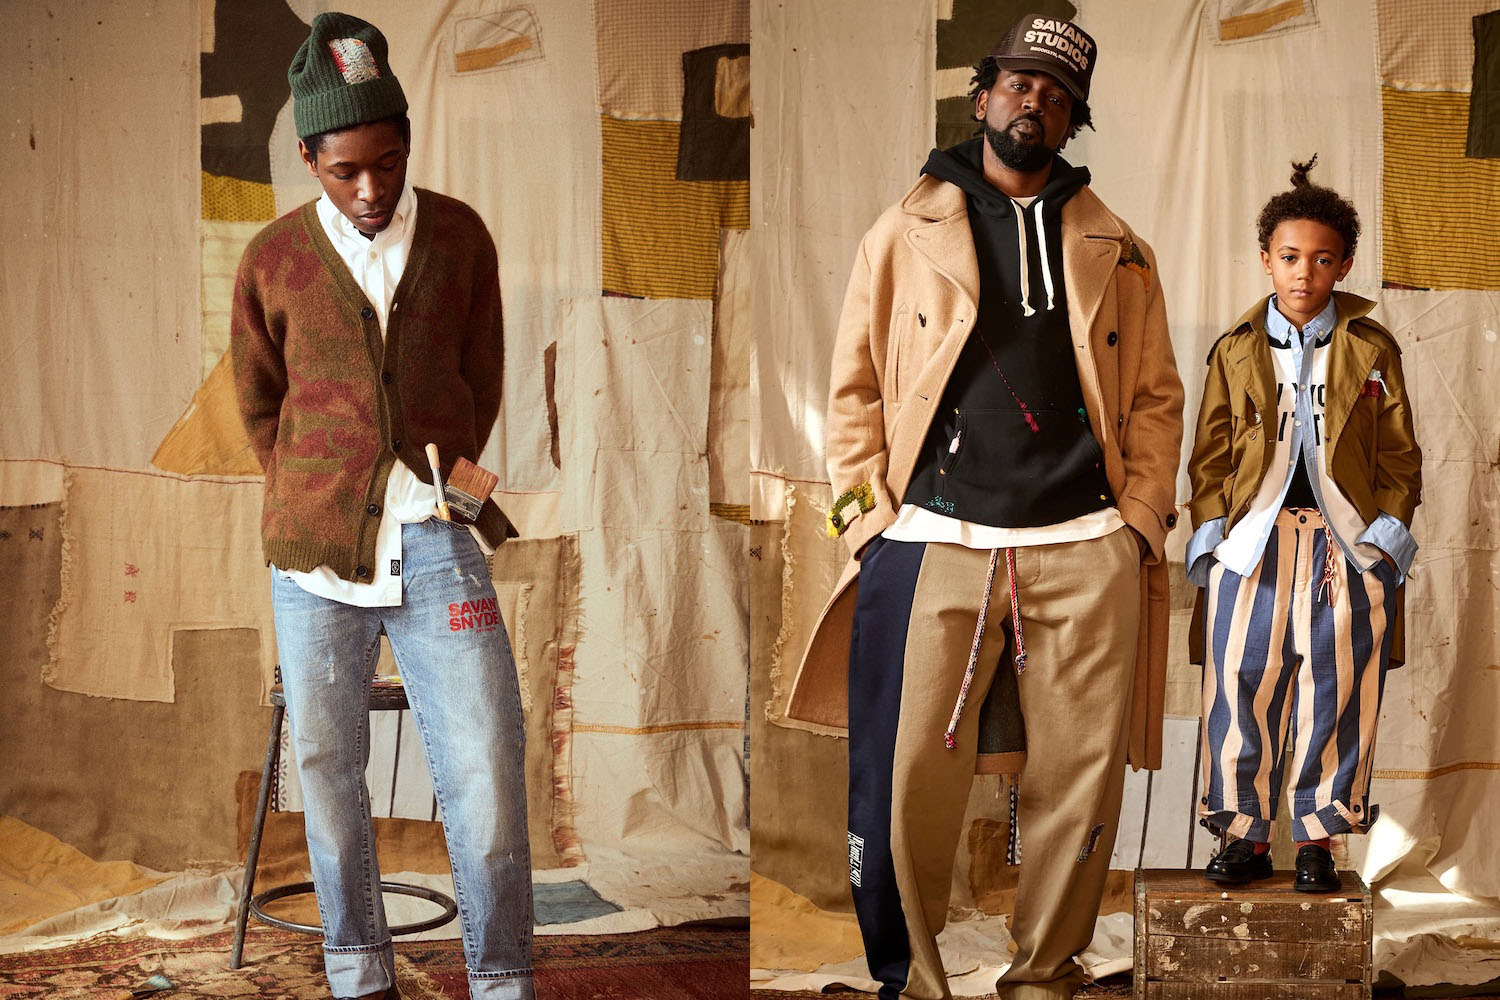 two model shots of the Todd Snyder x Savant Artifacts collection